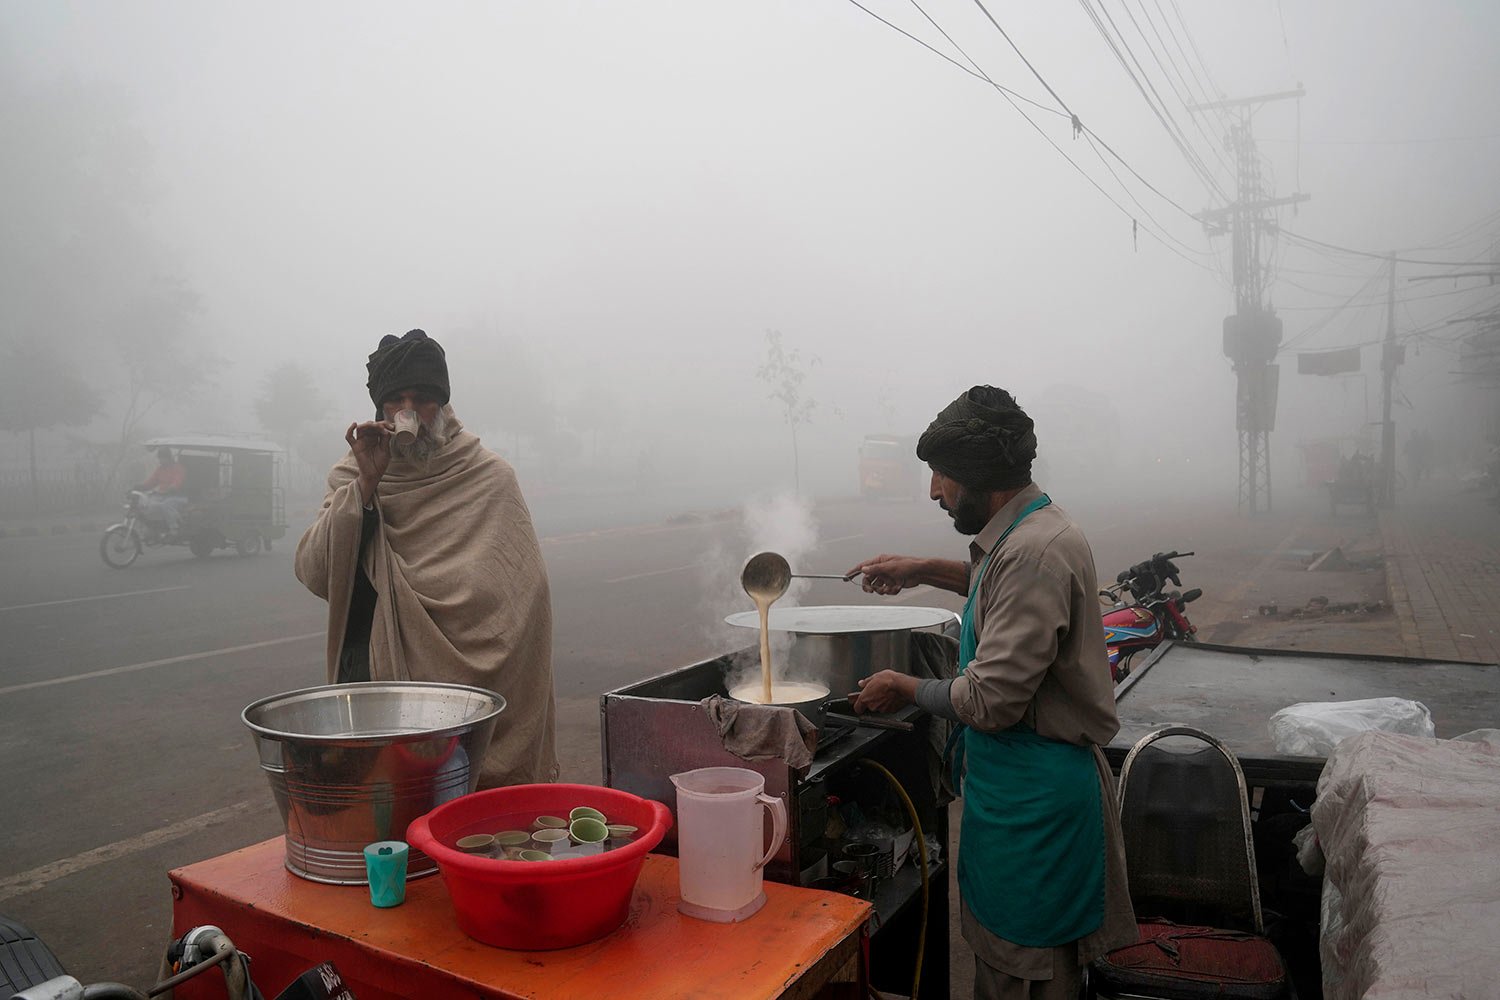  A man drinks tea at a roadside stall as heavy fog reduces visibility in Lahore, Pakistan, Monday, Jan. 2, 2023. (AP Photo/K.M. Chaudary) 